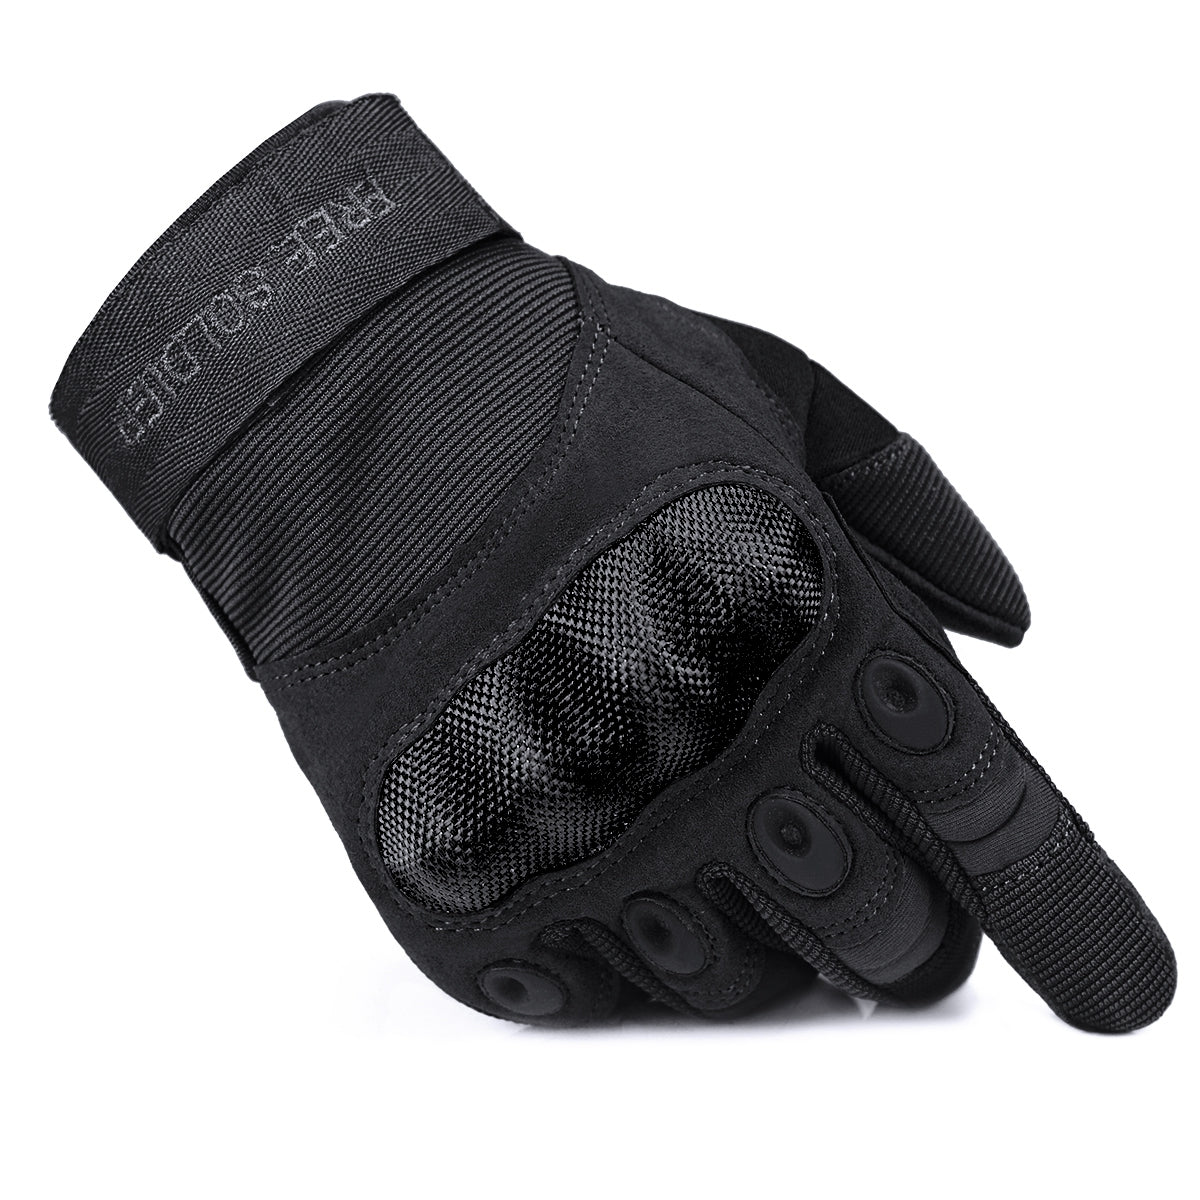 Tactical Gloves Tough Outdoor Military Combat Gloves Full Finger